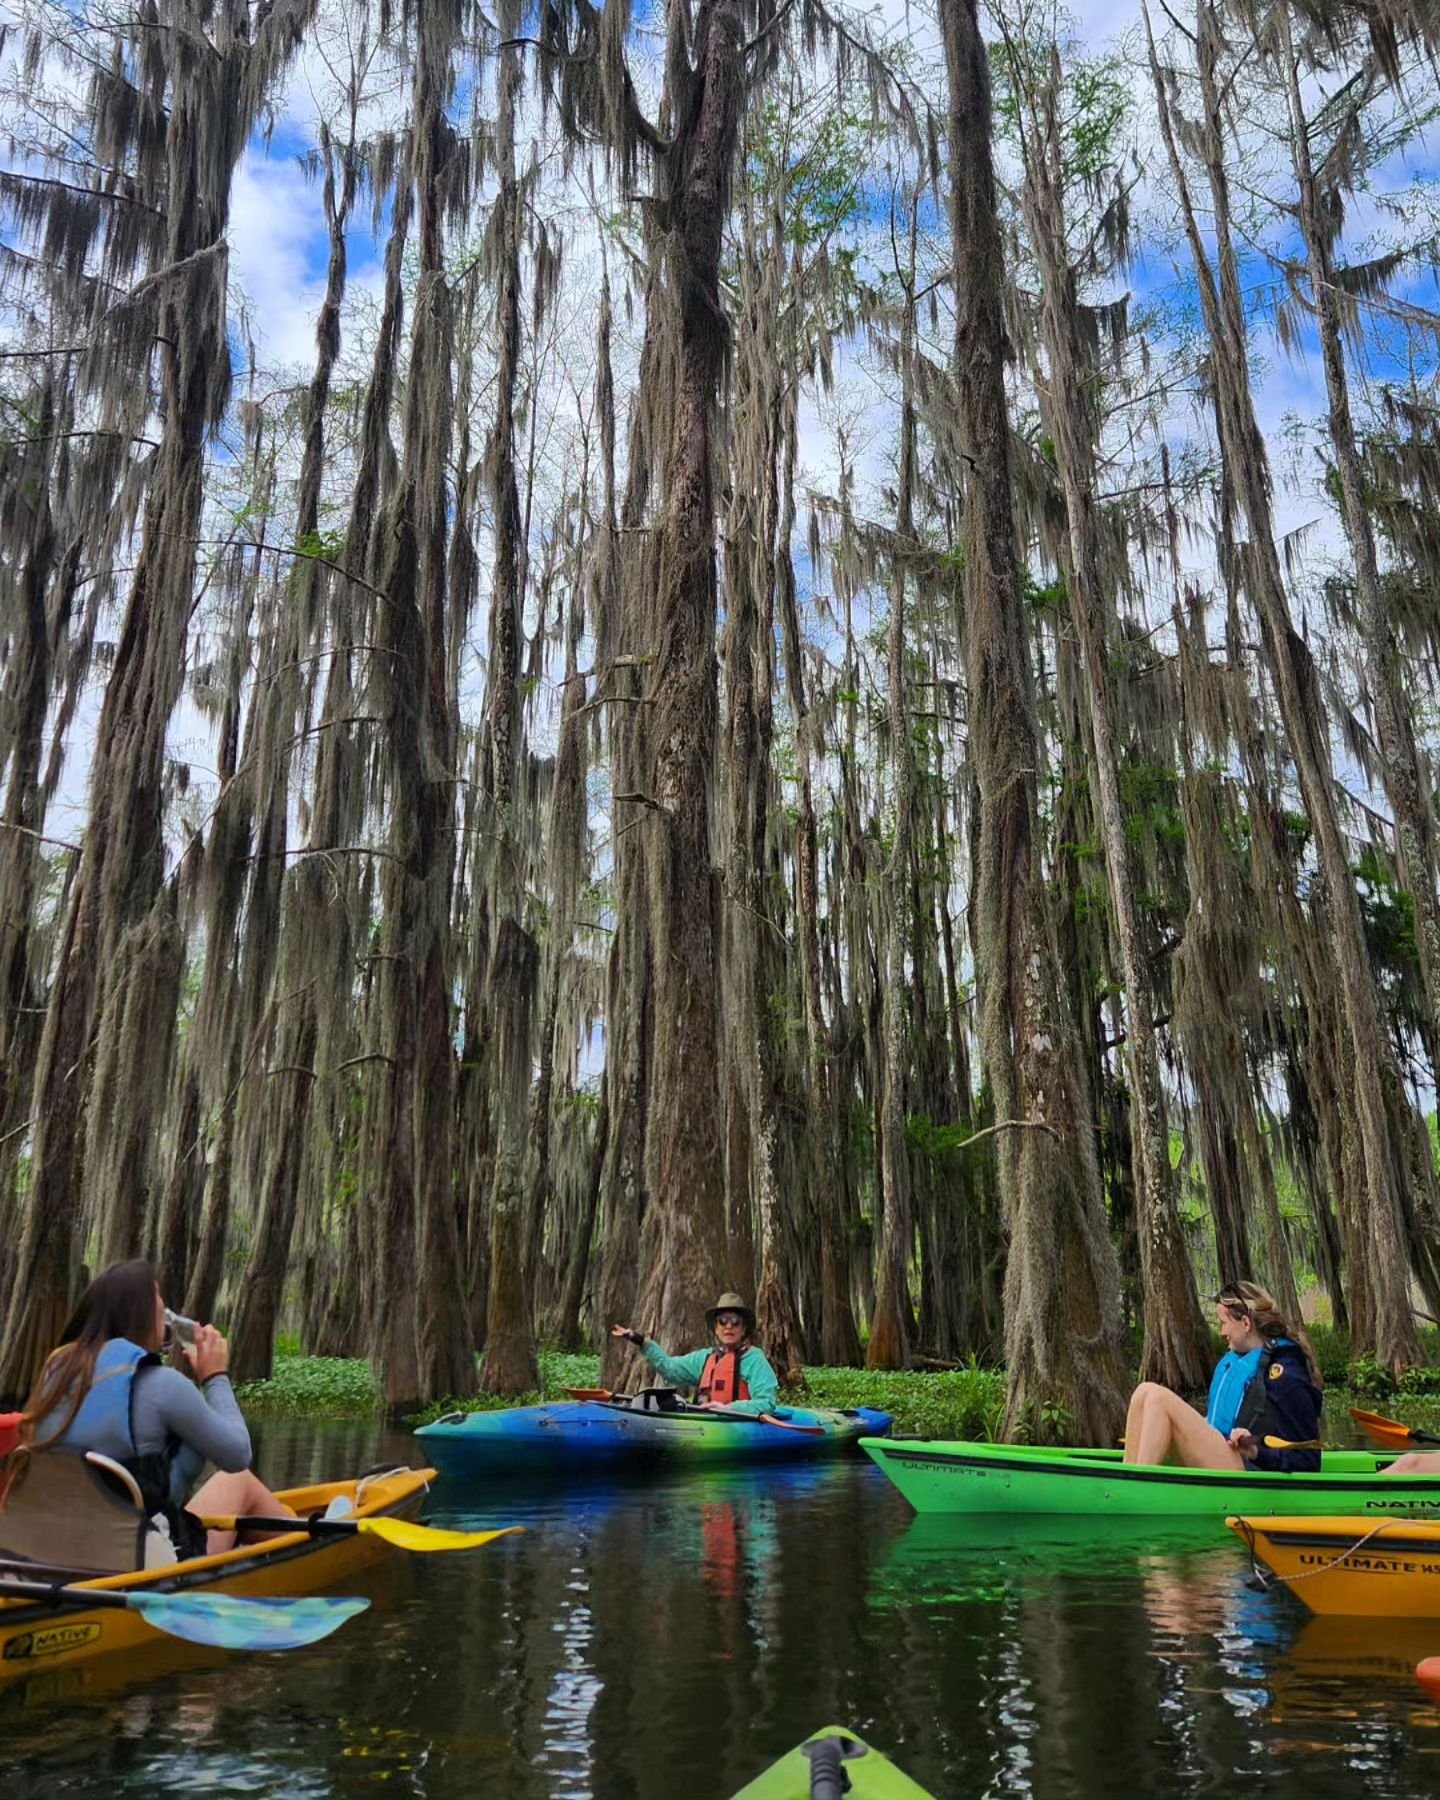 So happy to guide sweep for Janenne @ducinaltumkayak! It was a wonderful and peaceful adventure kayaking on Lake Martin through the moss-draped cypress and tupelo trees, observing the wildlife and getting some sun and fresh air. The weather was great